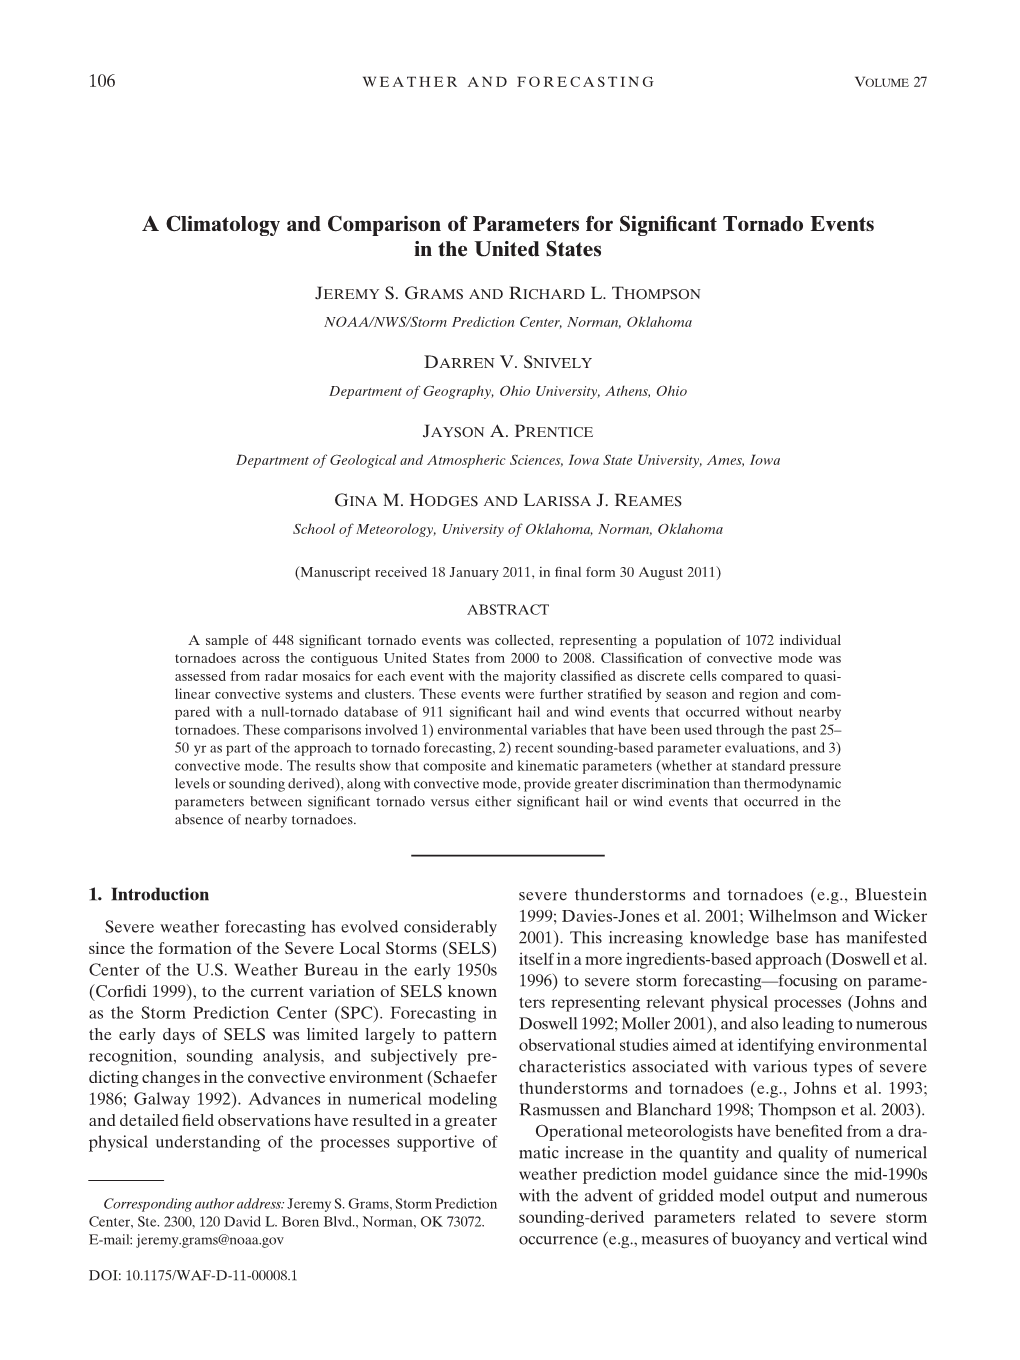 A Climatology and Comparison of Parameters for Significant Tornado